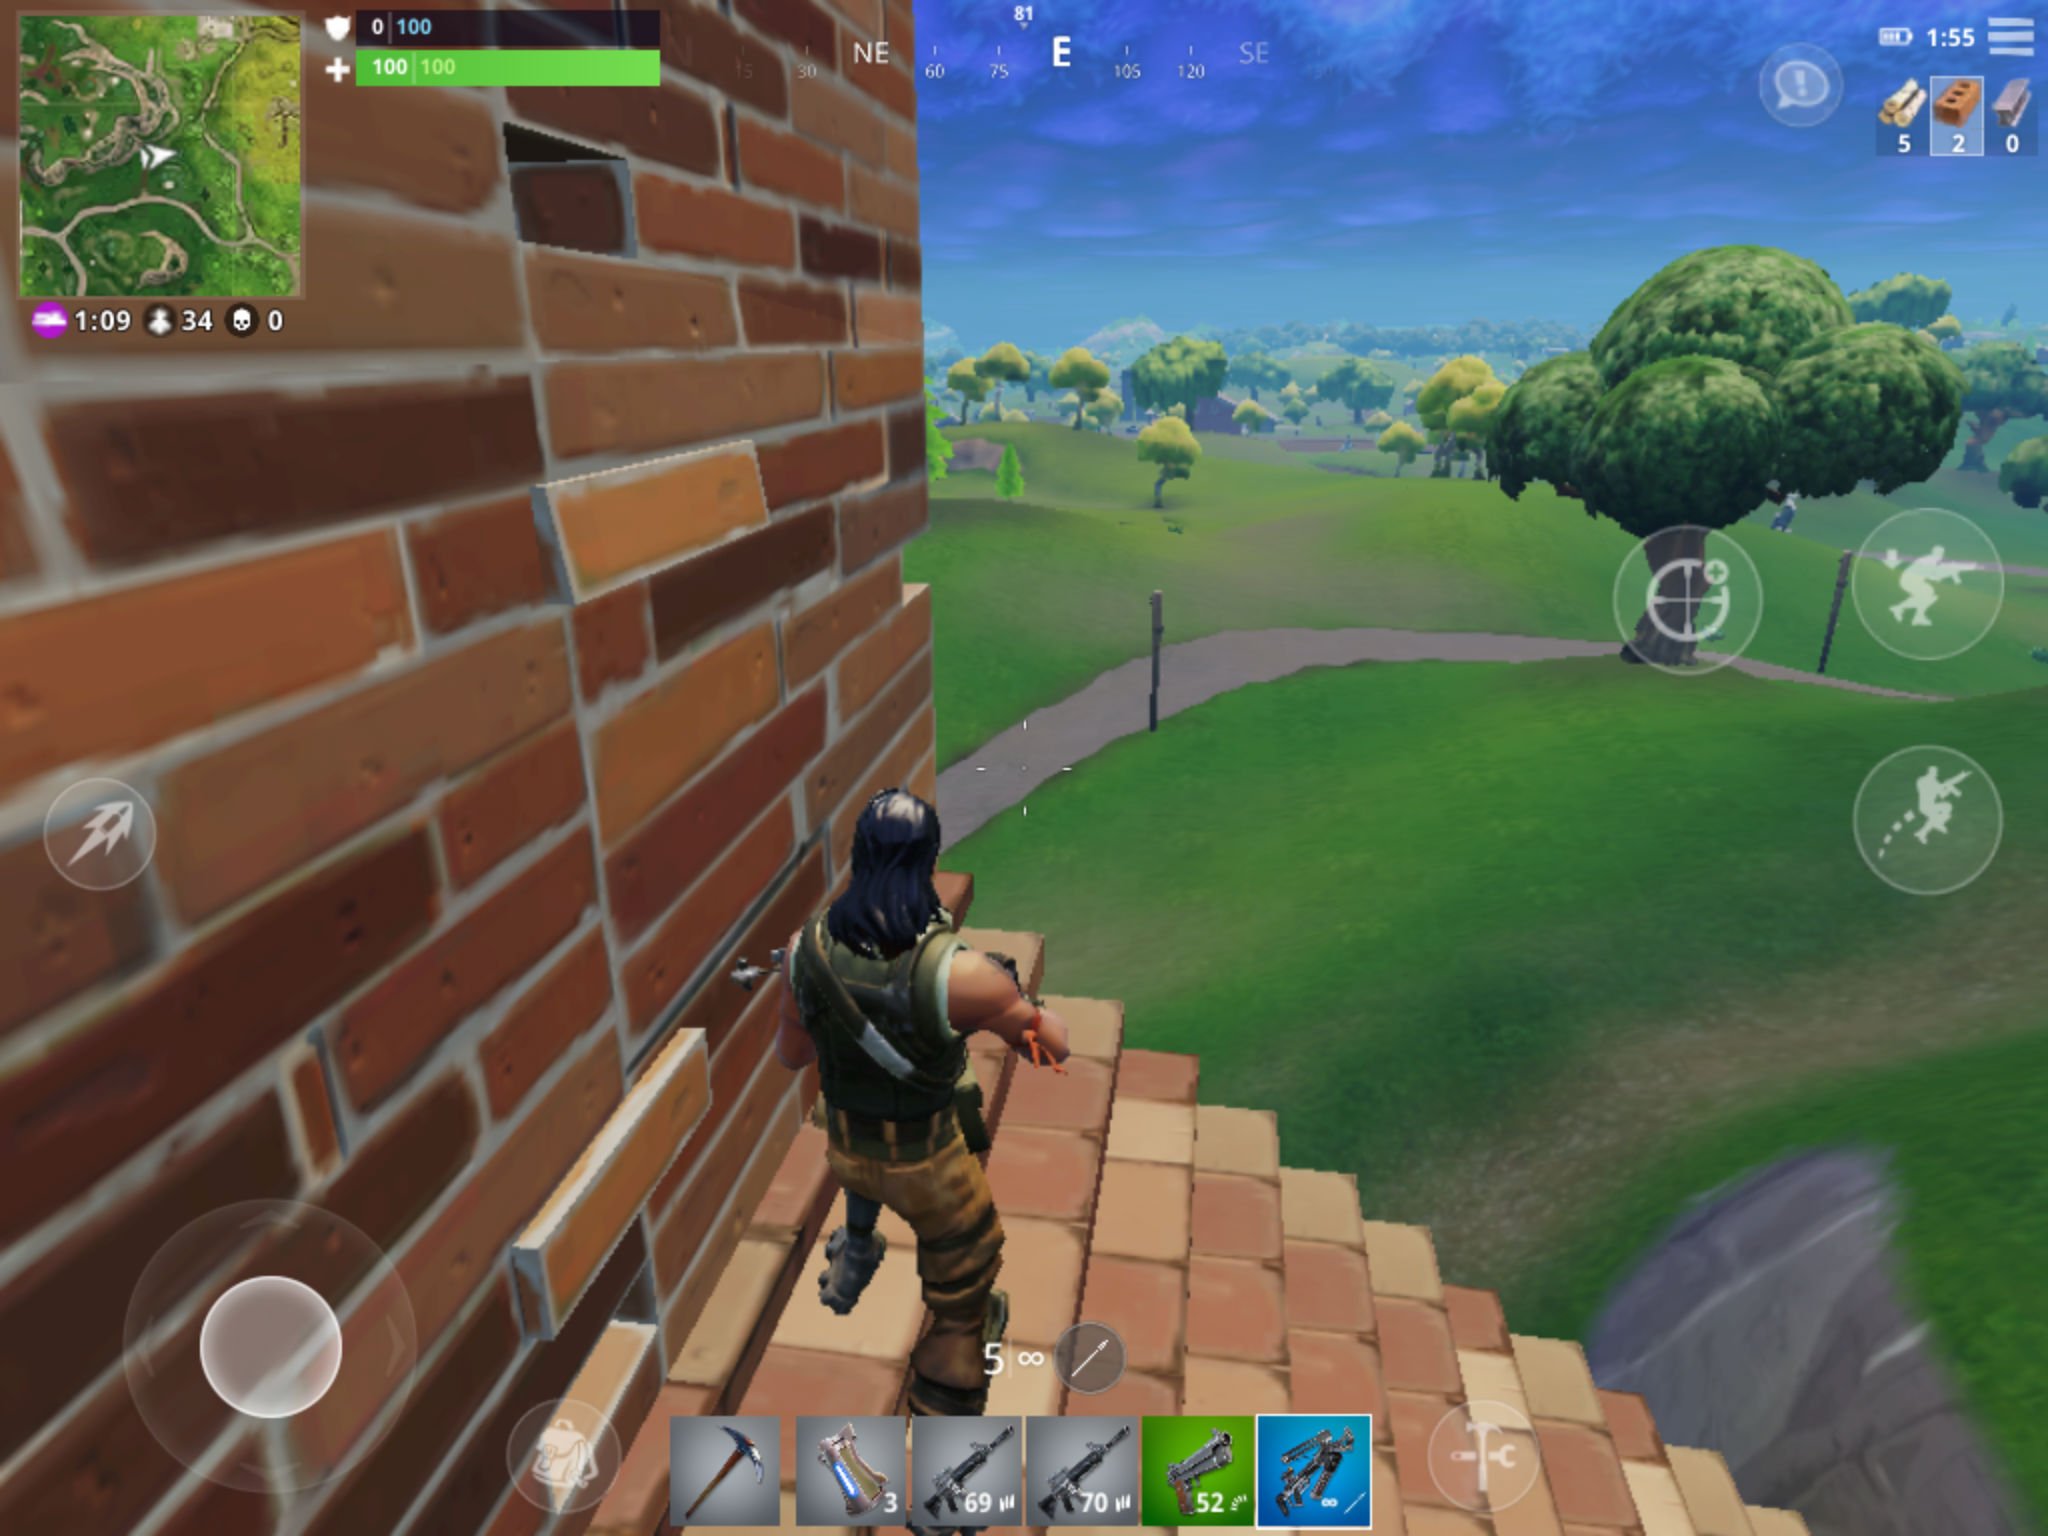 Fortnite on mobile: A guide to building for beginners